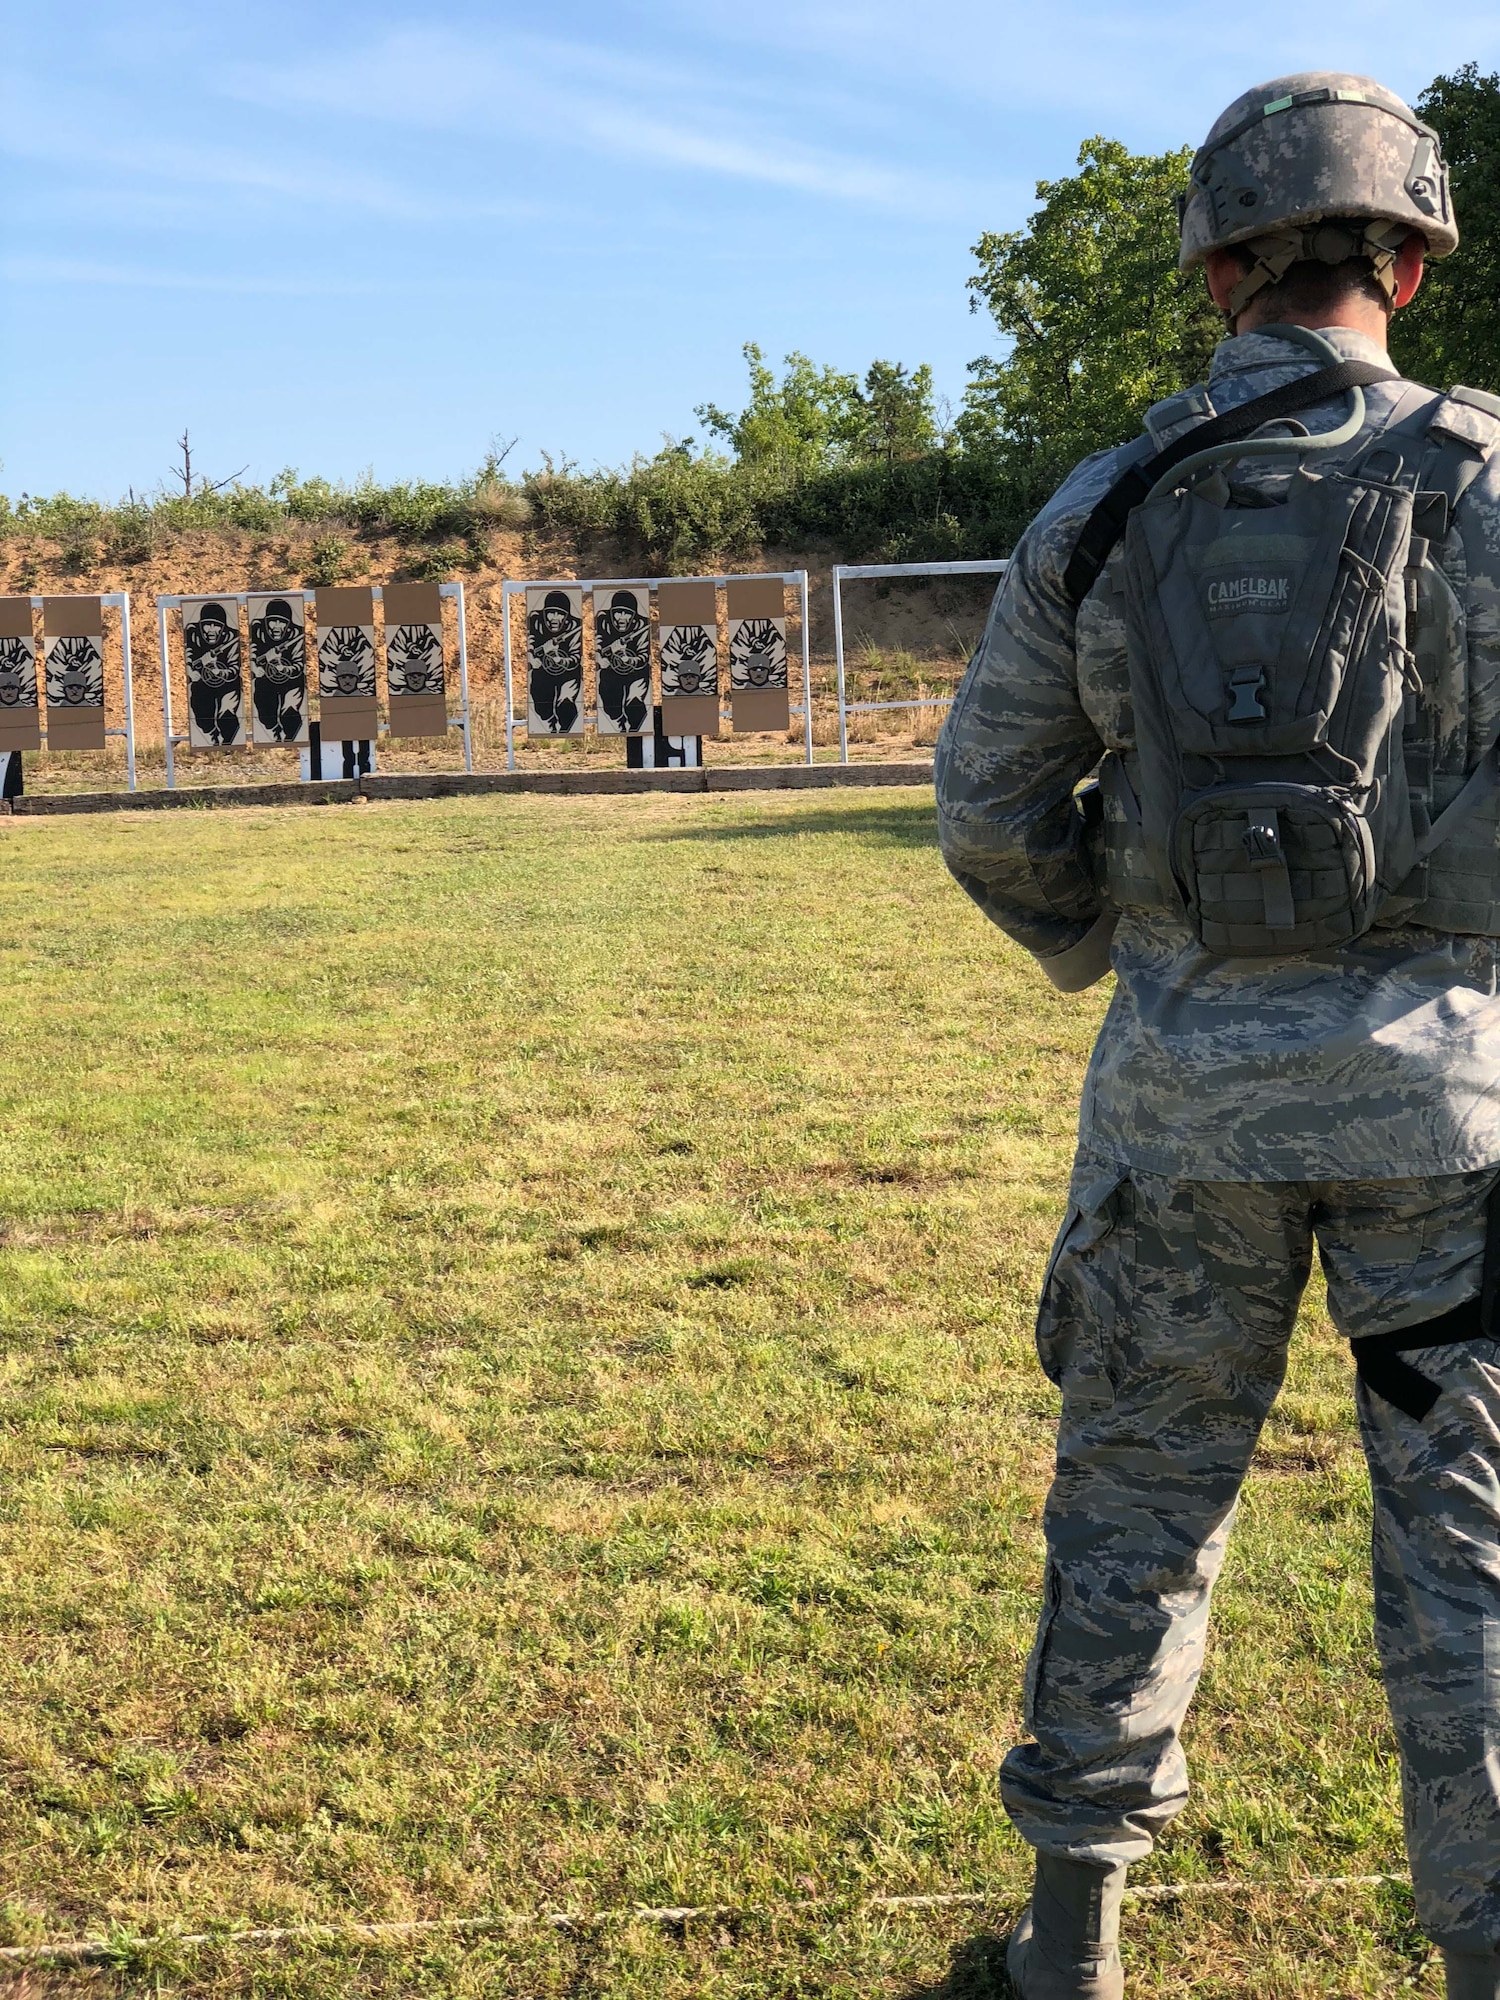 Staff Sgt. Caleb Gutting, 141st Security Forces Squadron, stands ready for the pistol Excellence in Competition match.  The 47th Annual Winston P. Wilson Championship, Robinson Maneuver Training Center, Arkansas, April 30, 2018.  The annual events, hosted by the National Guard Marksmanship Training Center April 29-May 4, 2018, offer Servicemembers from the National Guard and international community an opportunity to test marksmanship skills in a battle-focused environment. (U.S. Air National Guard photo by Staff Sgt. Hope Funderburk)